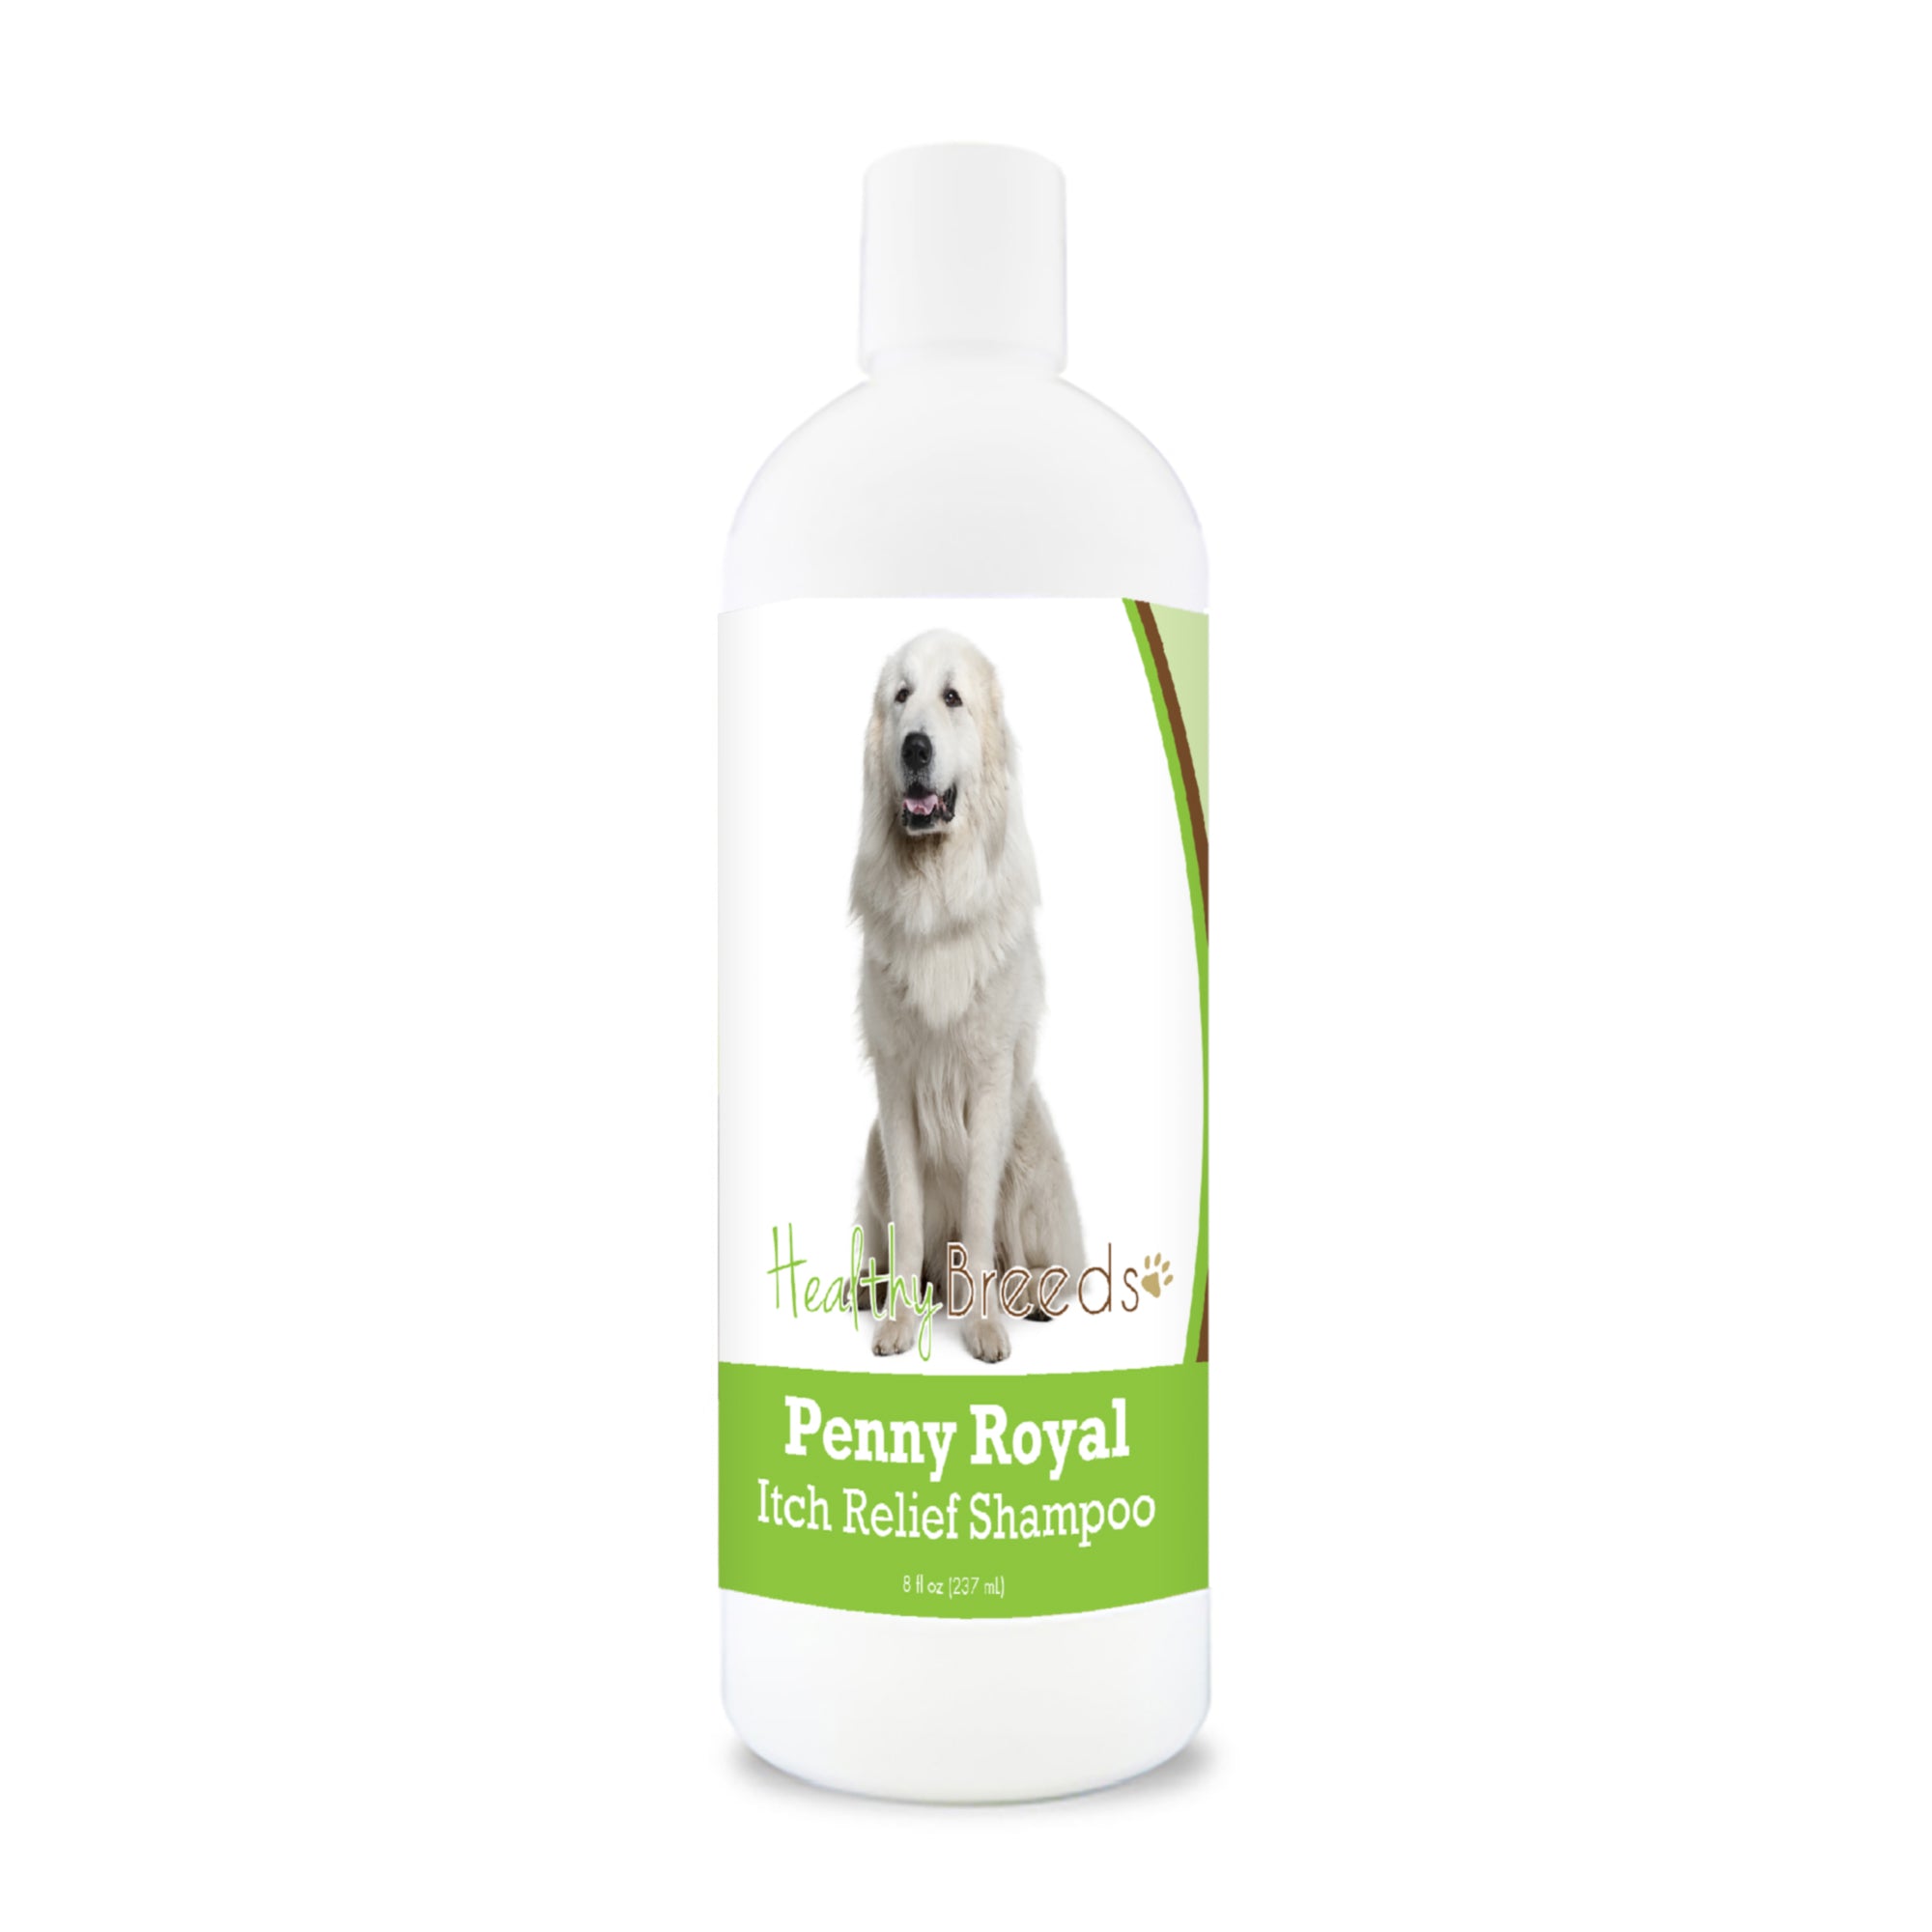 Great Pyrenees Penny Royal Itch Relief Shampoo 8 oz